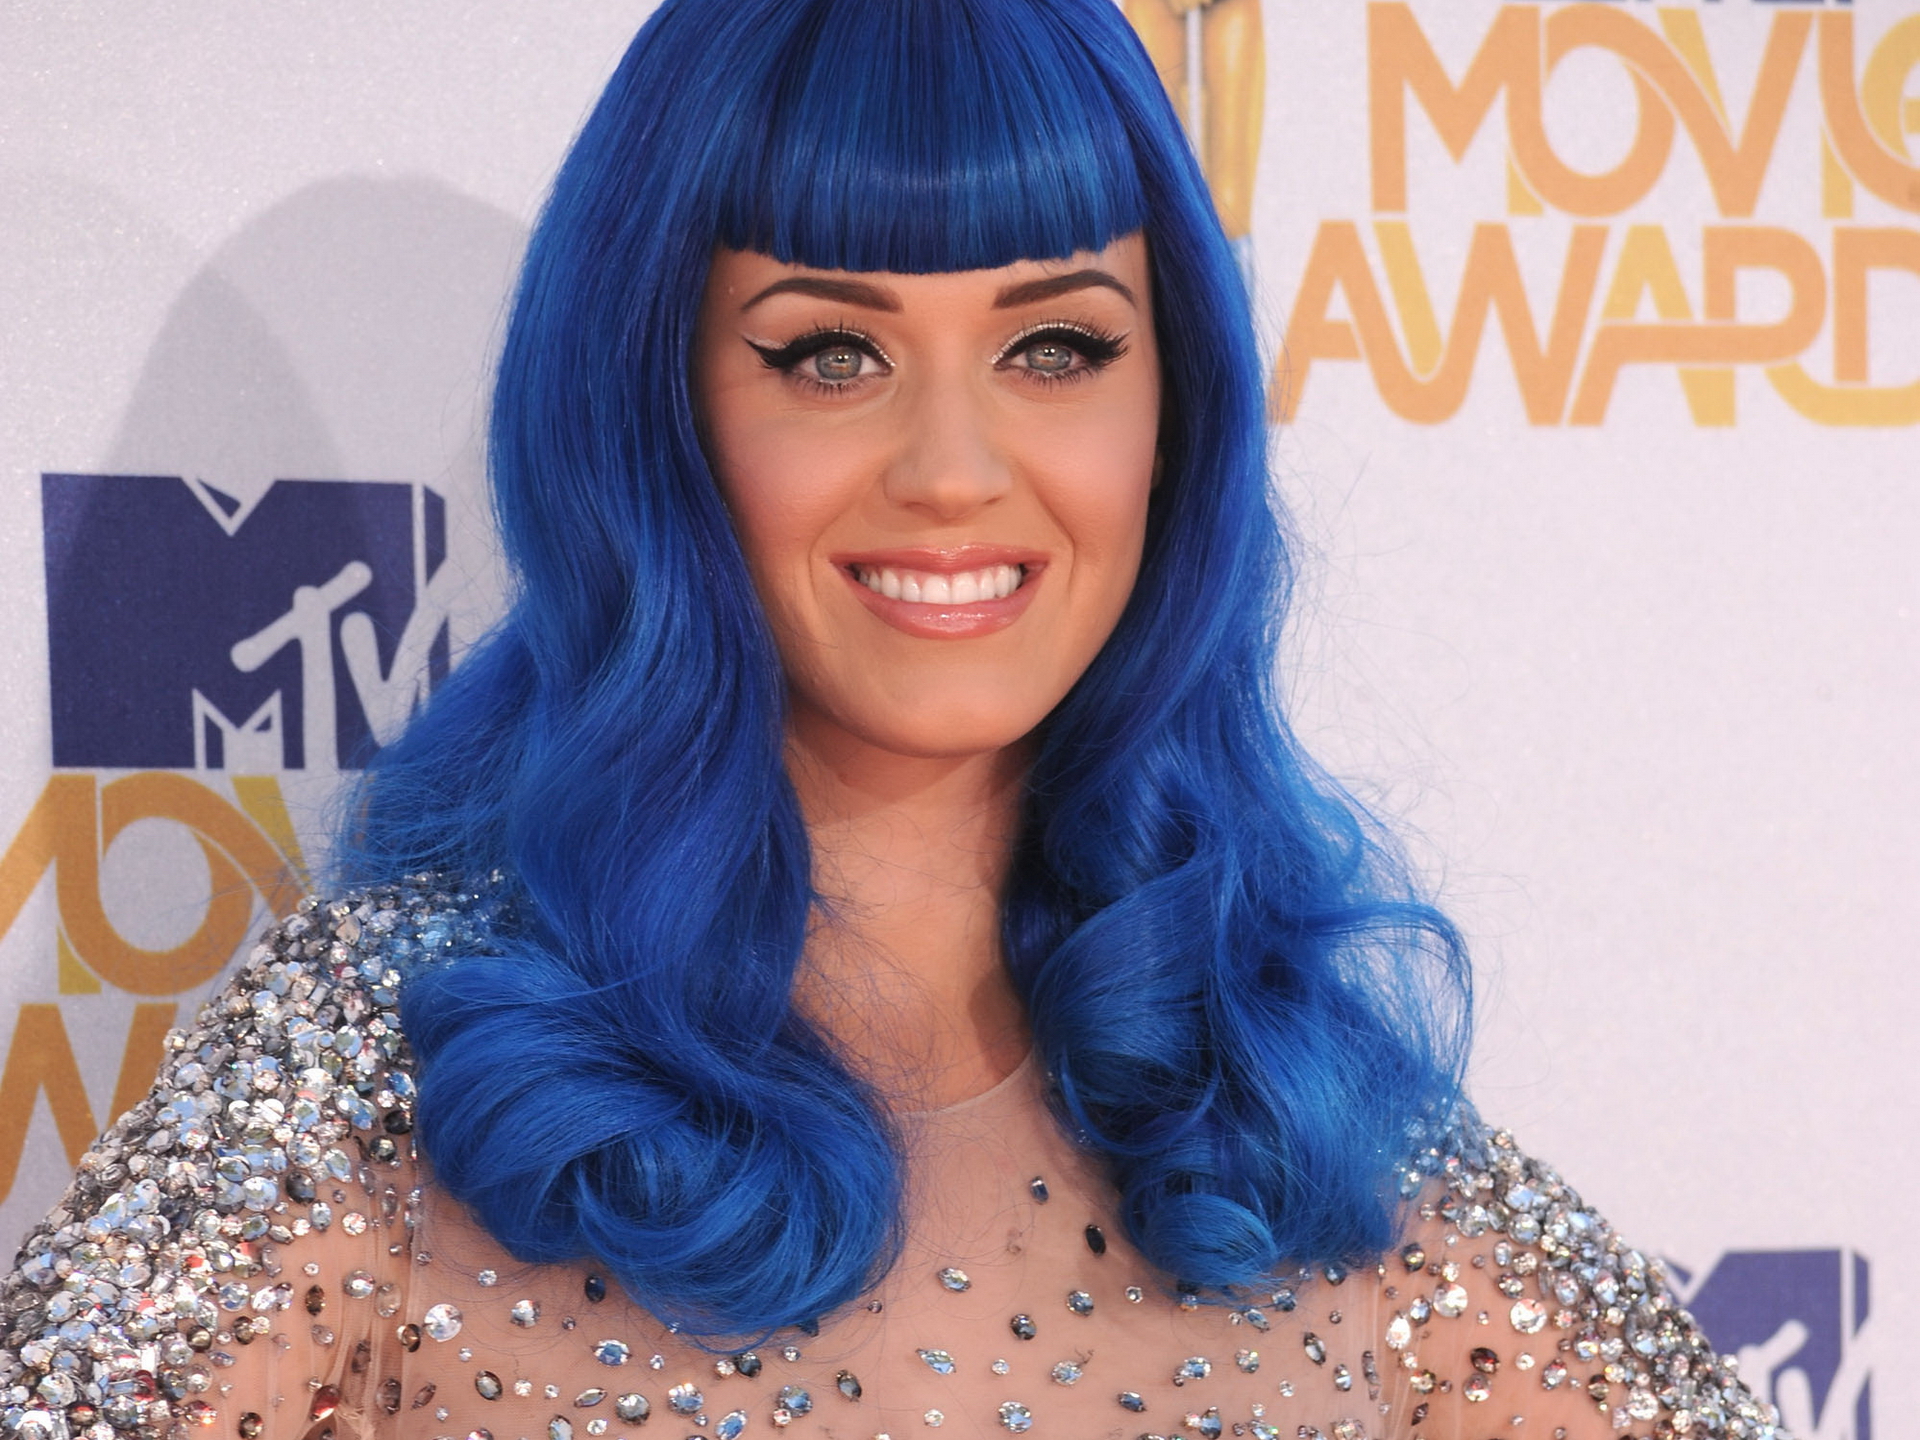 Katy Perry Hairstyle 2015 Super Bowl Prediction